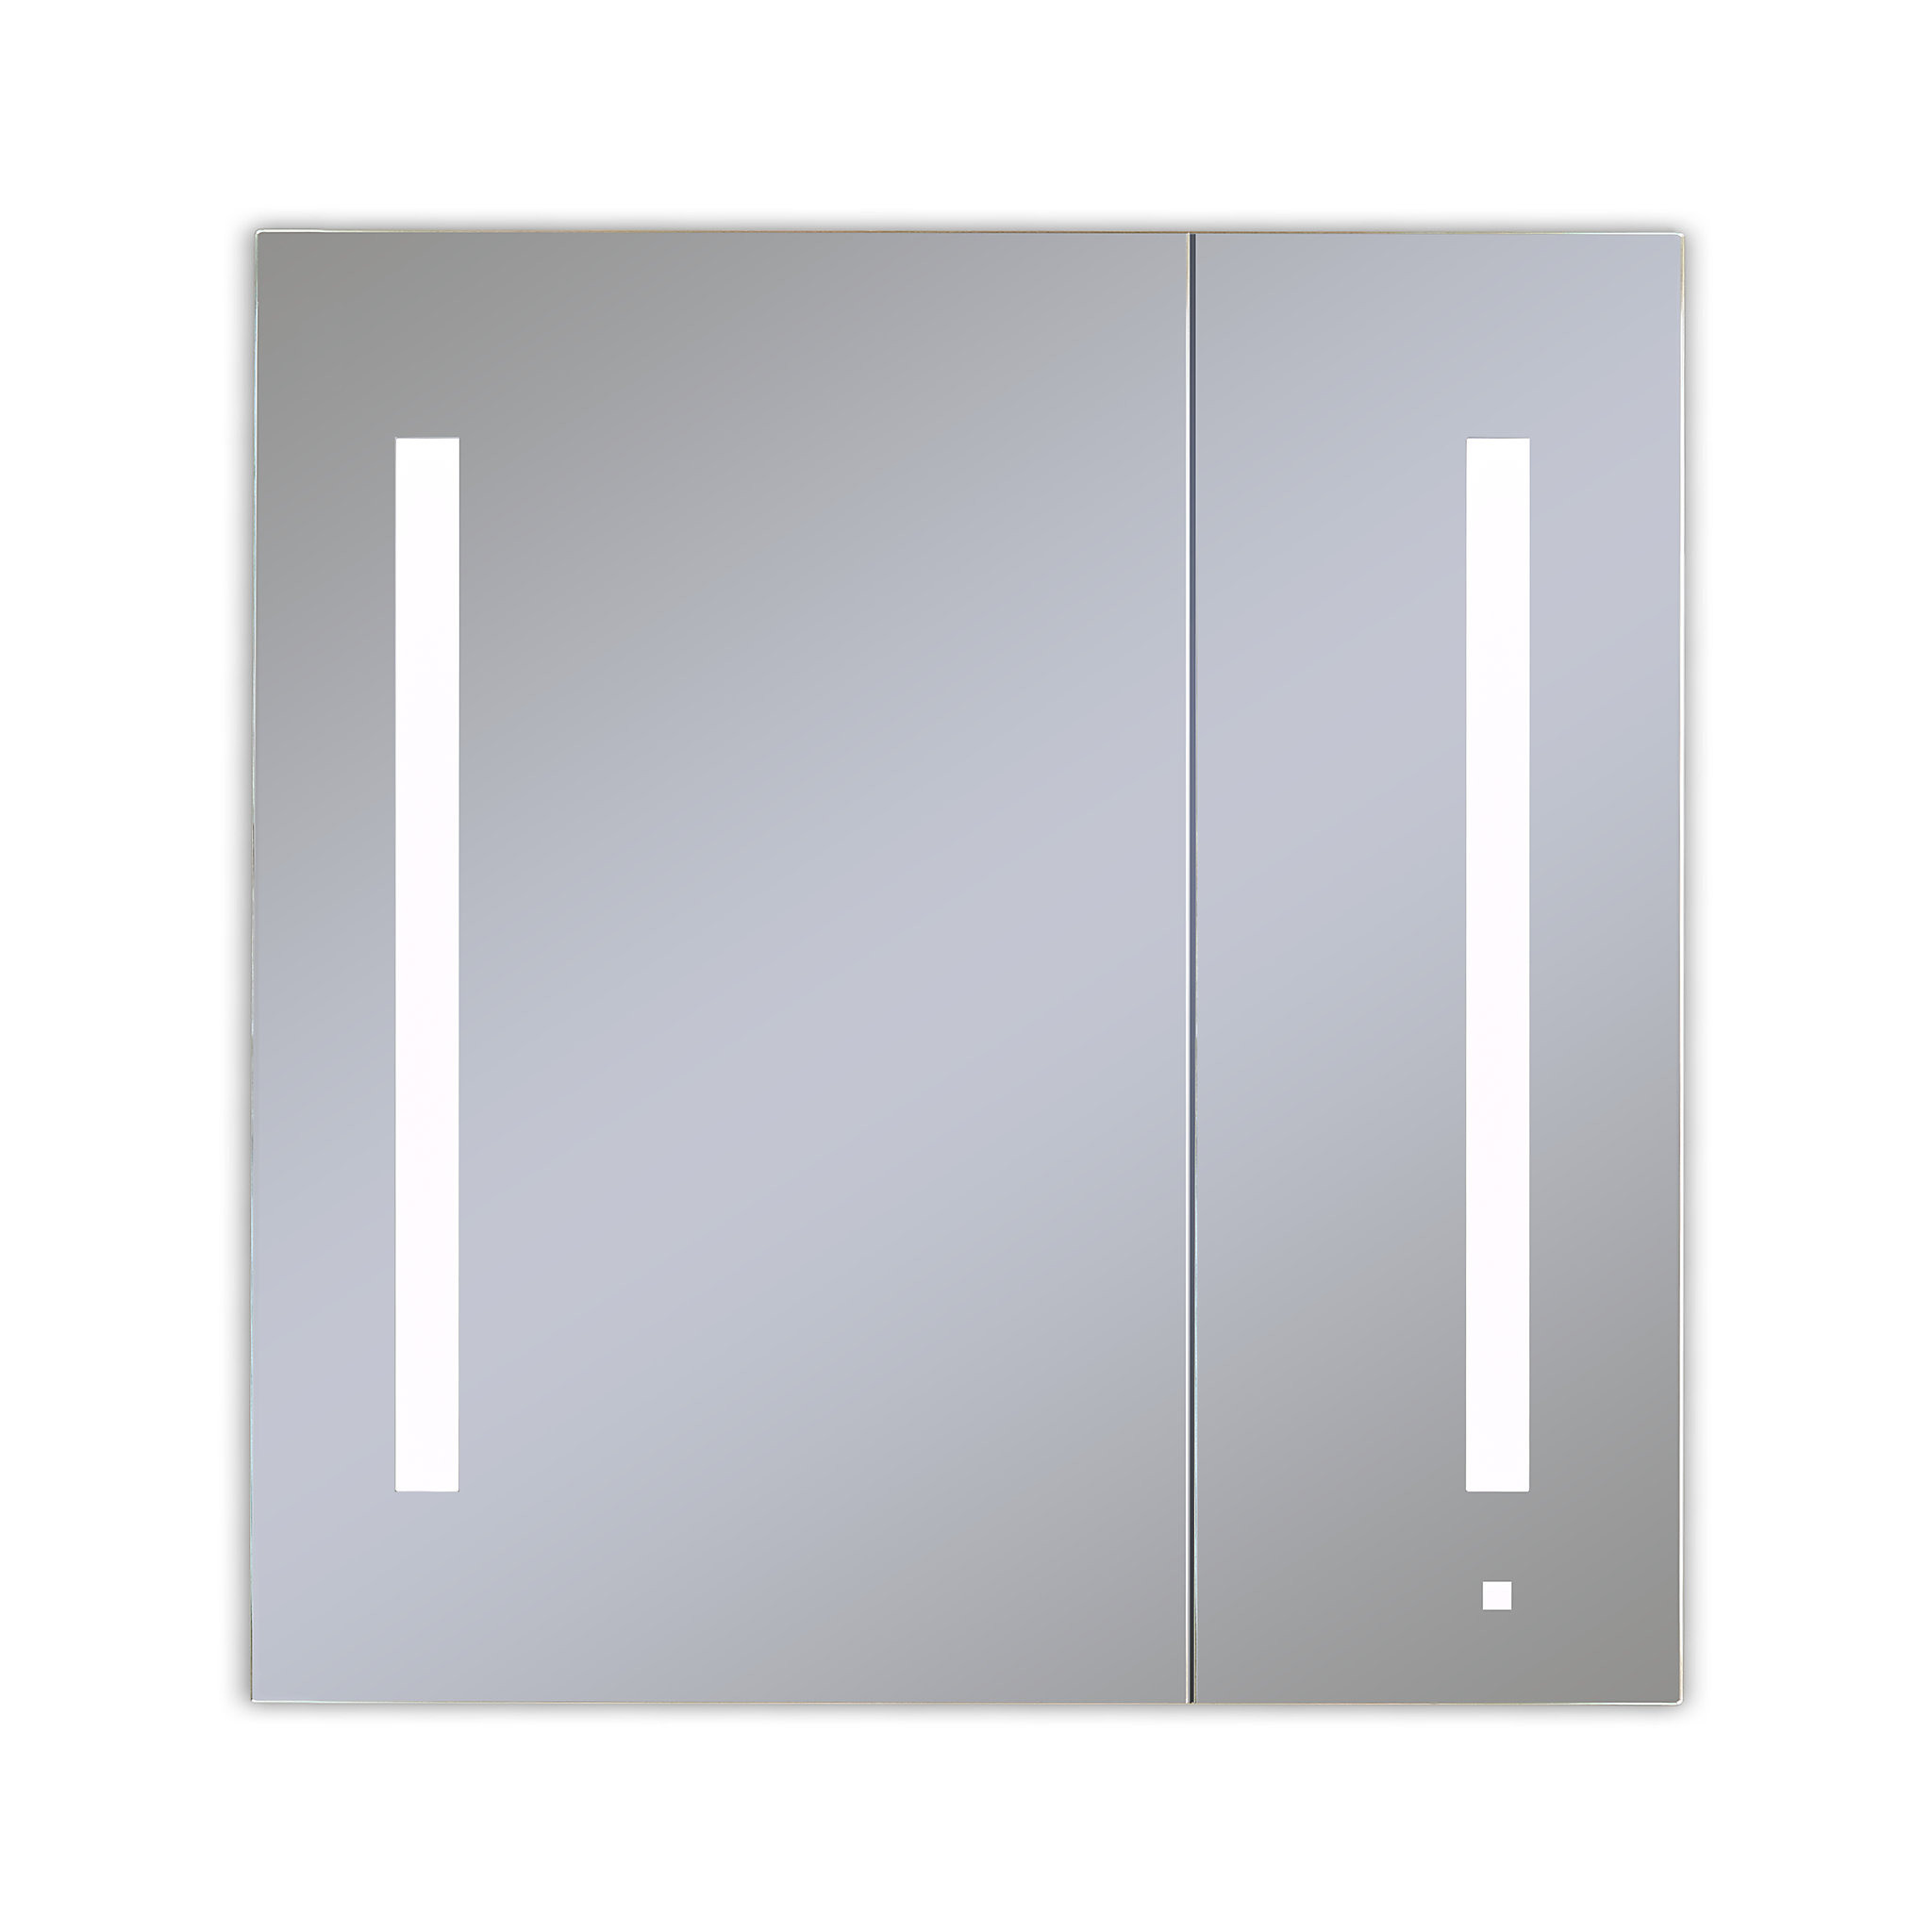 Robern AC3030D4P2LA AiO Lighted Cabinet, 30" x 30" x 4", Two Door, LUM Lighting, 4000K Temperature (Cool Light), Dimmable, OM Au